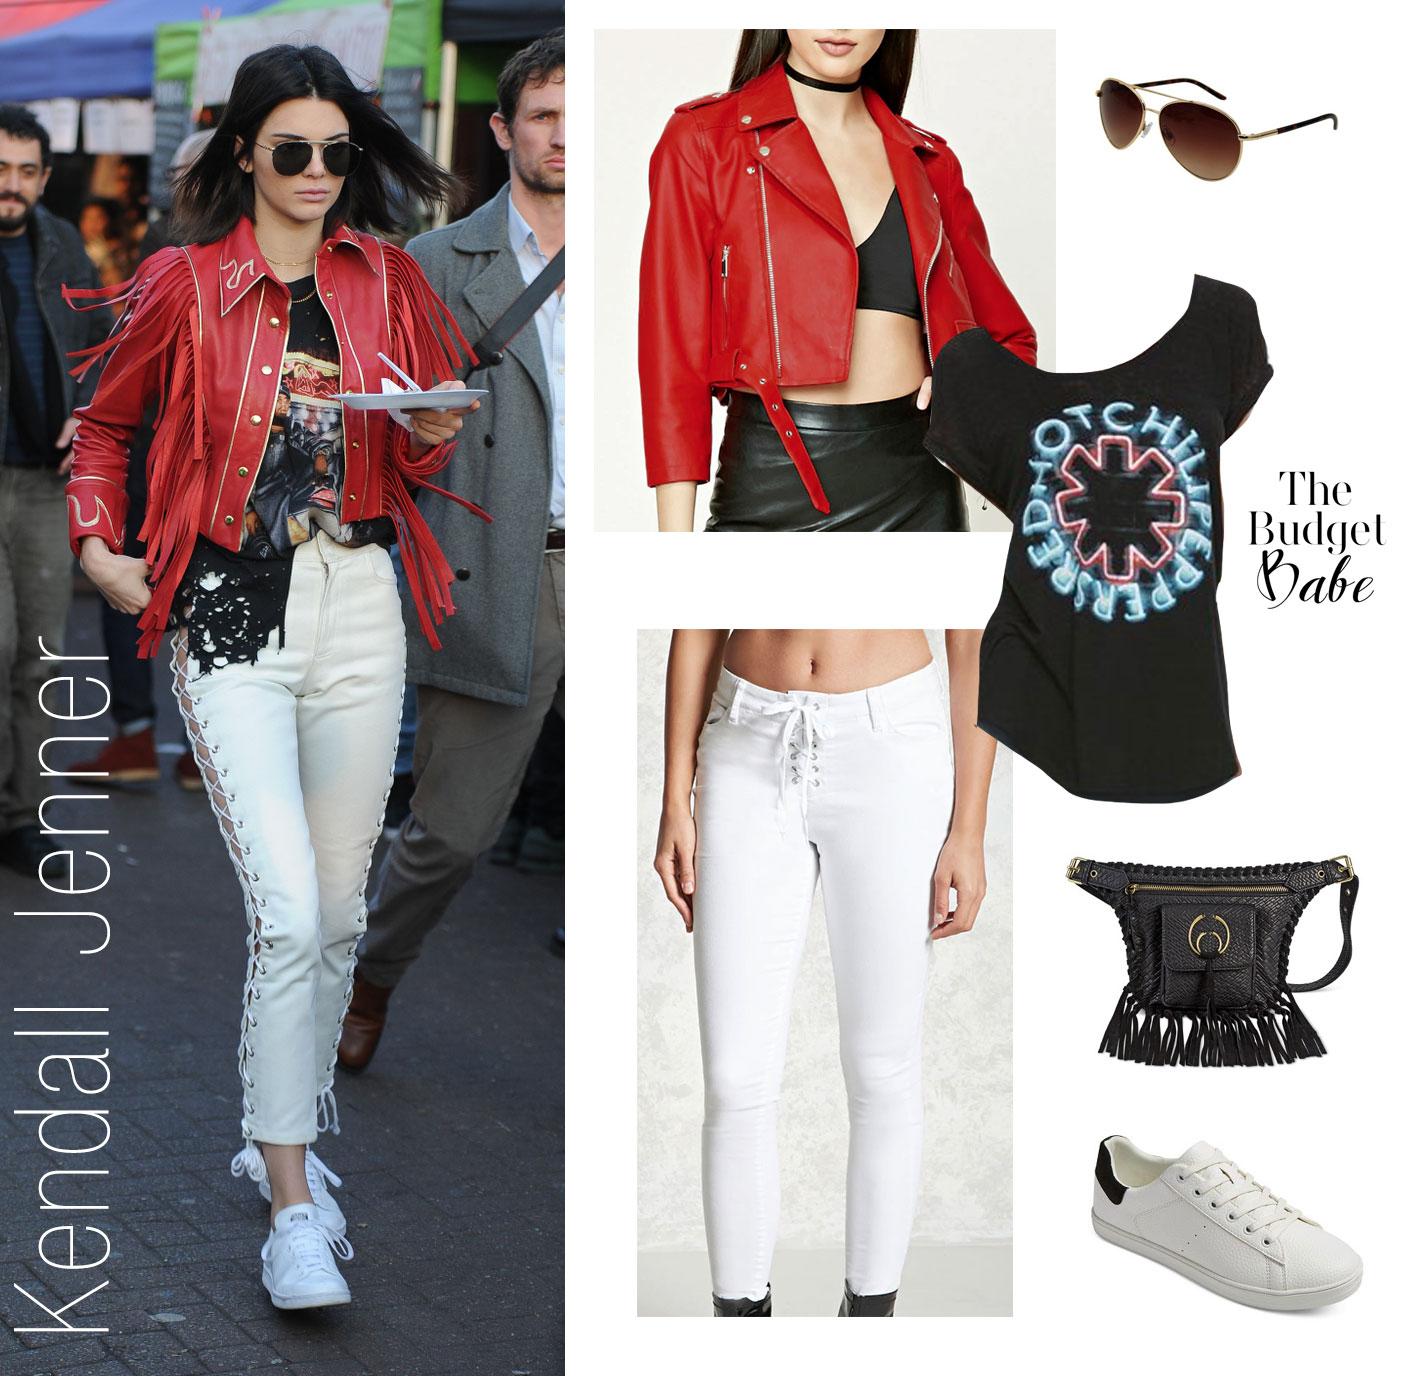 Kendall Jenner explores Portabello Market in London wearing a red leather jacket and white lace-up leather pants.